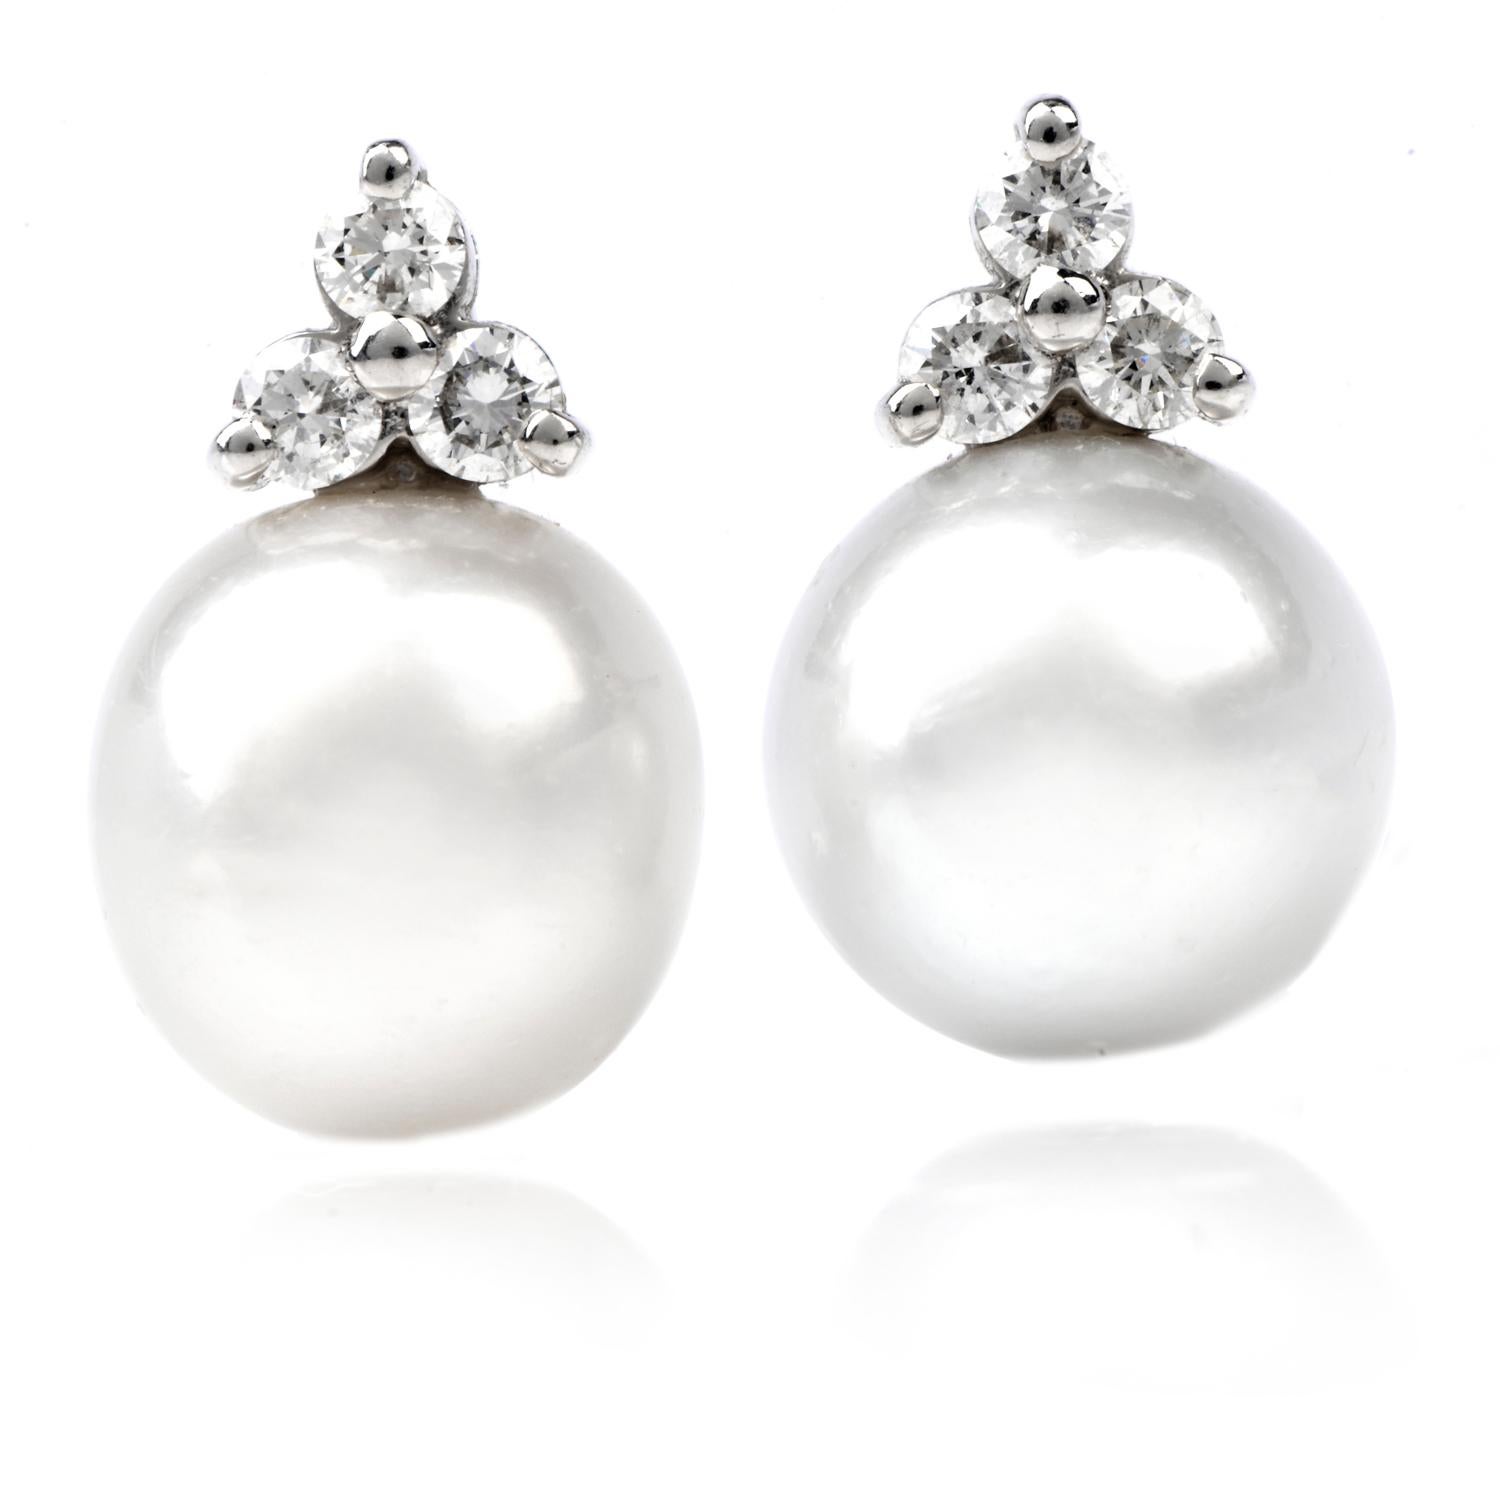 Should the South Sea be the 8th wonder of the world?

Well, maybe since it has the ability to produce exquisite
Pieces of nature such as these extraordinary South Sea Pearl Studs with natural inclousions.

Measuring 13mm each, the White Pearls dance